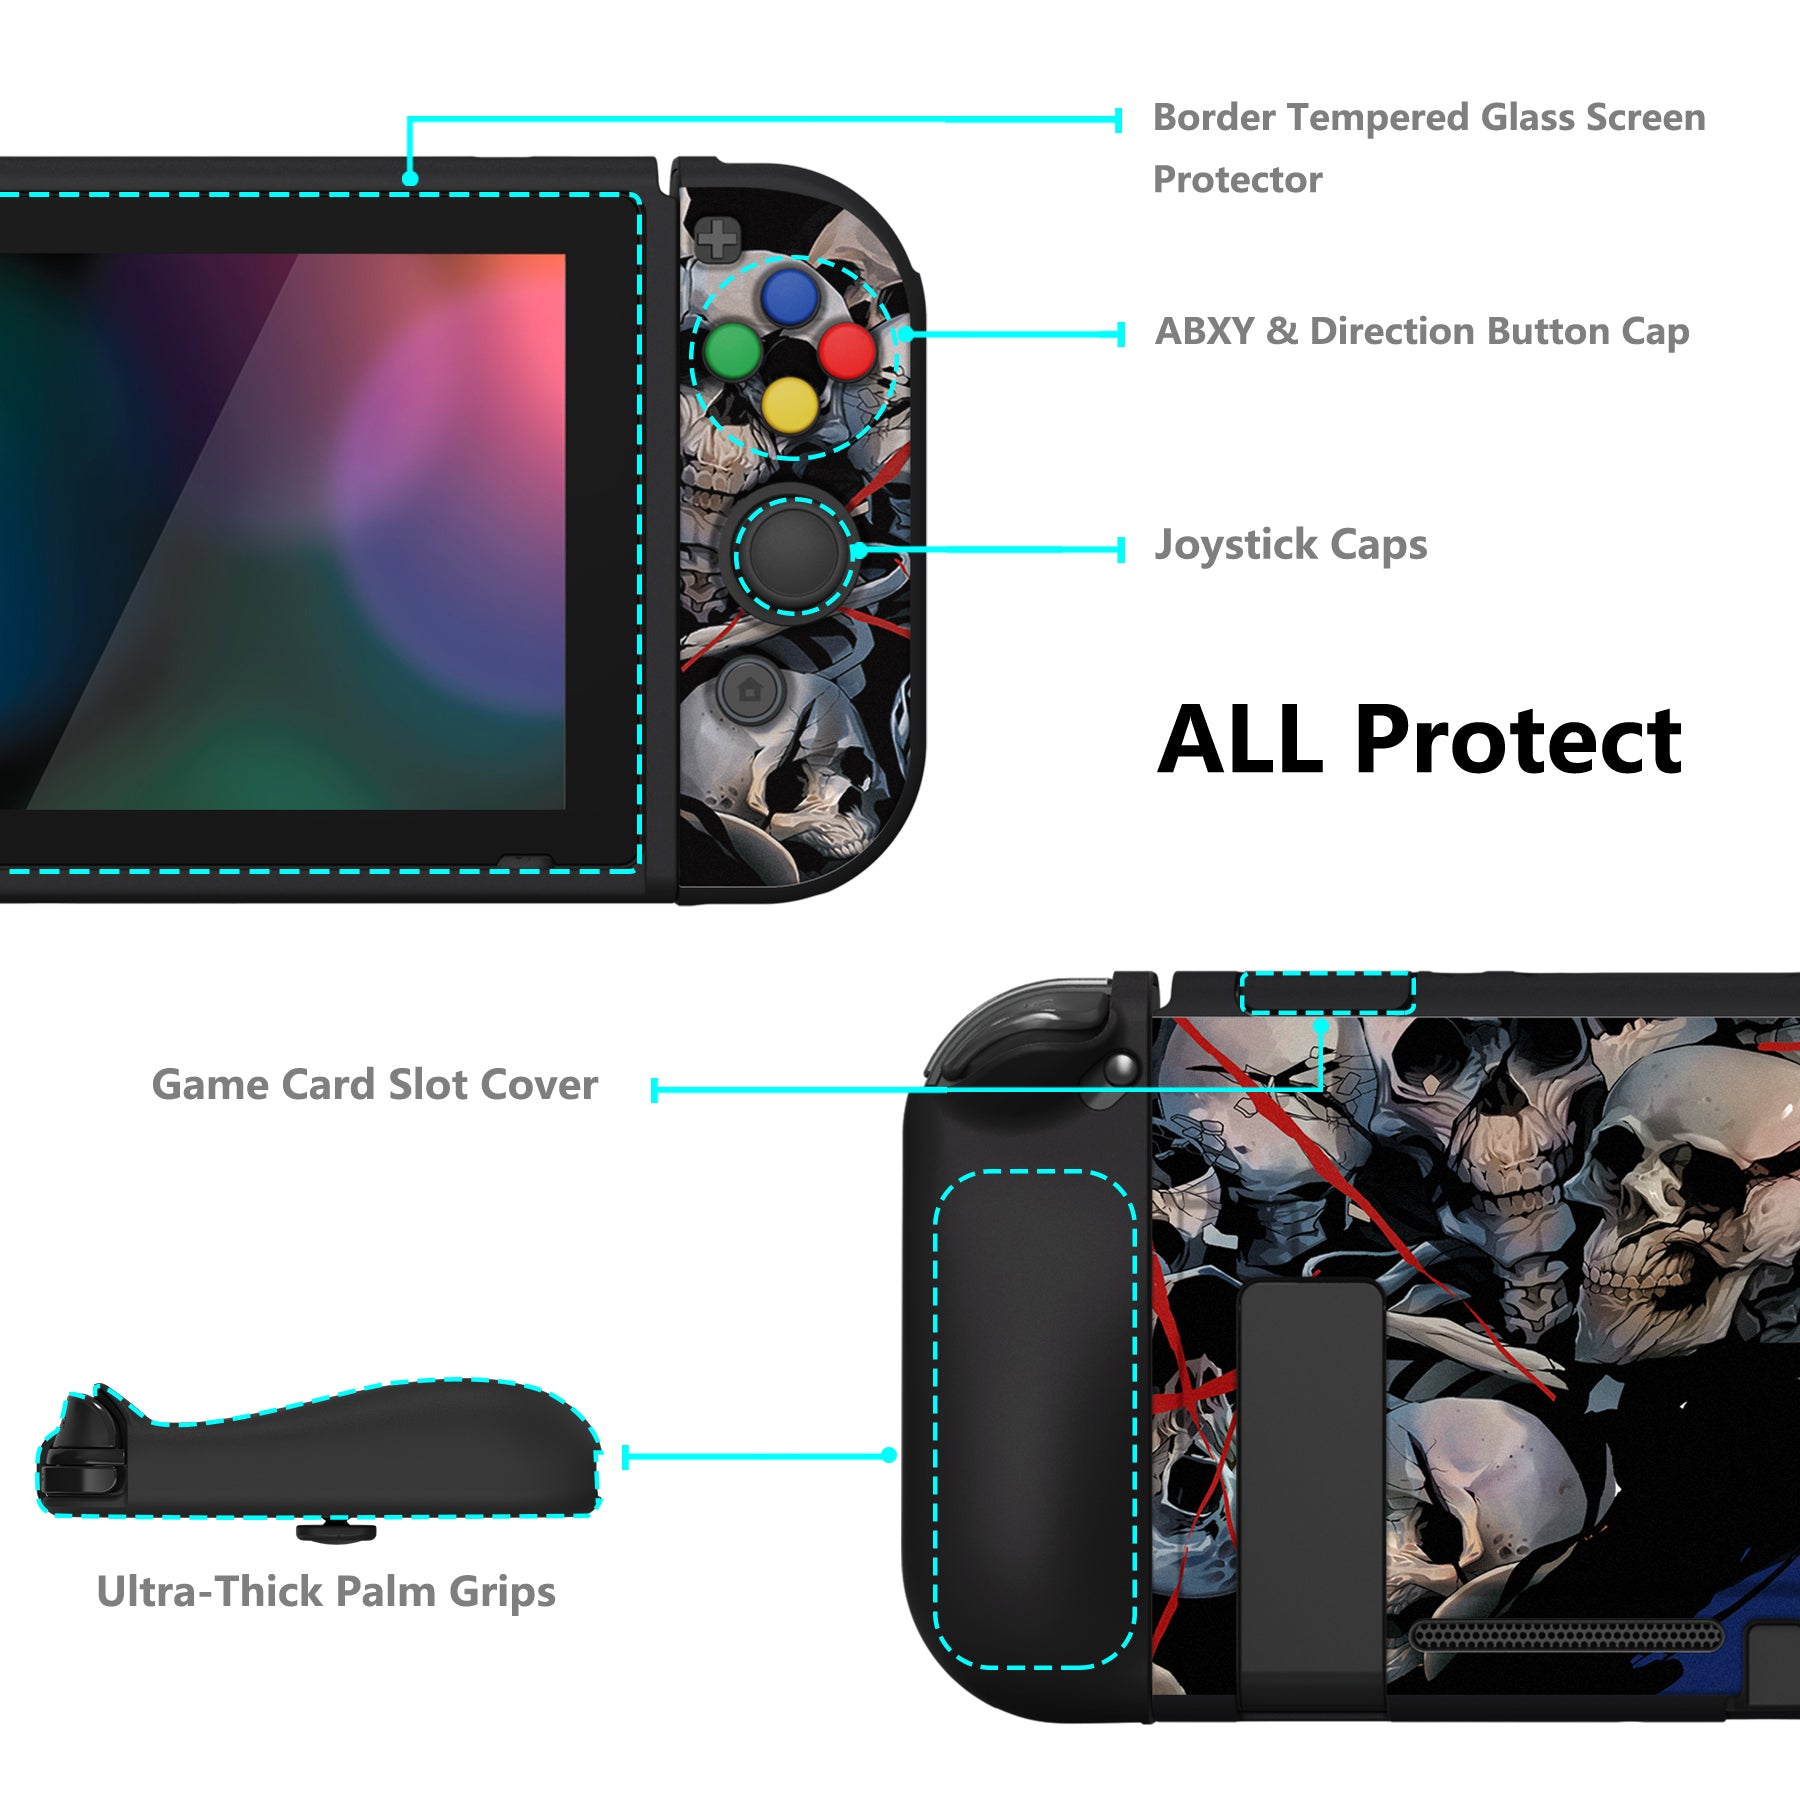 PlayVital ZealProtect Soft Protective Case for Nintendo Switch, Flexible Cover for Switch with Tempered Glass Screen Protector & Thumb Grips & ABXY Direction Button Caps - Ghost of Samurai - RNSYV6041 playvital